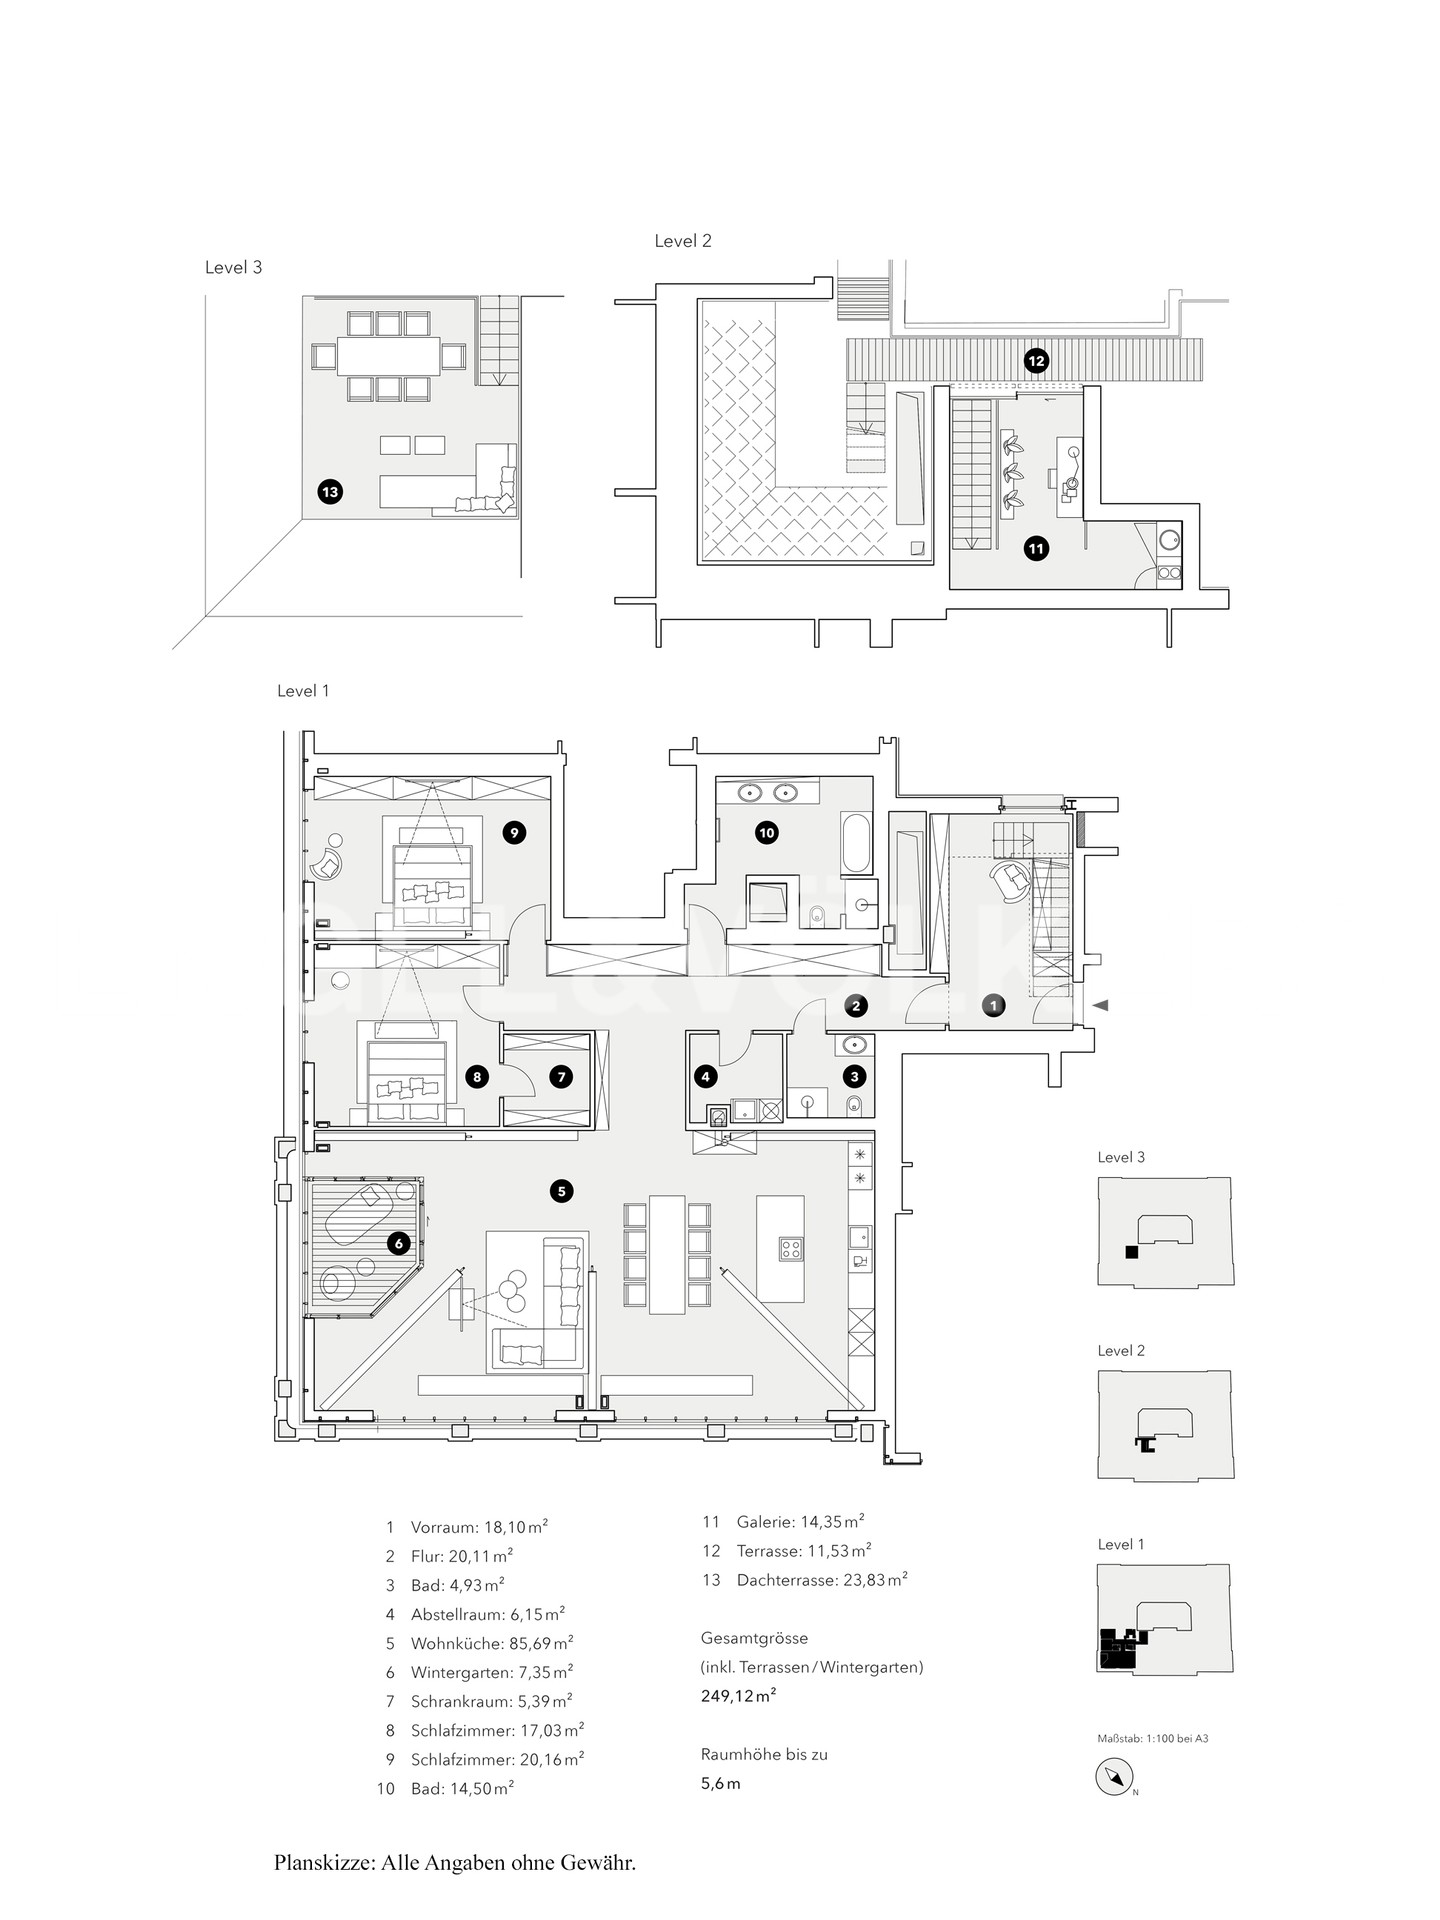 Apartment in 1st District - Floor Plan. All information is subject to change.